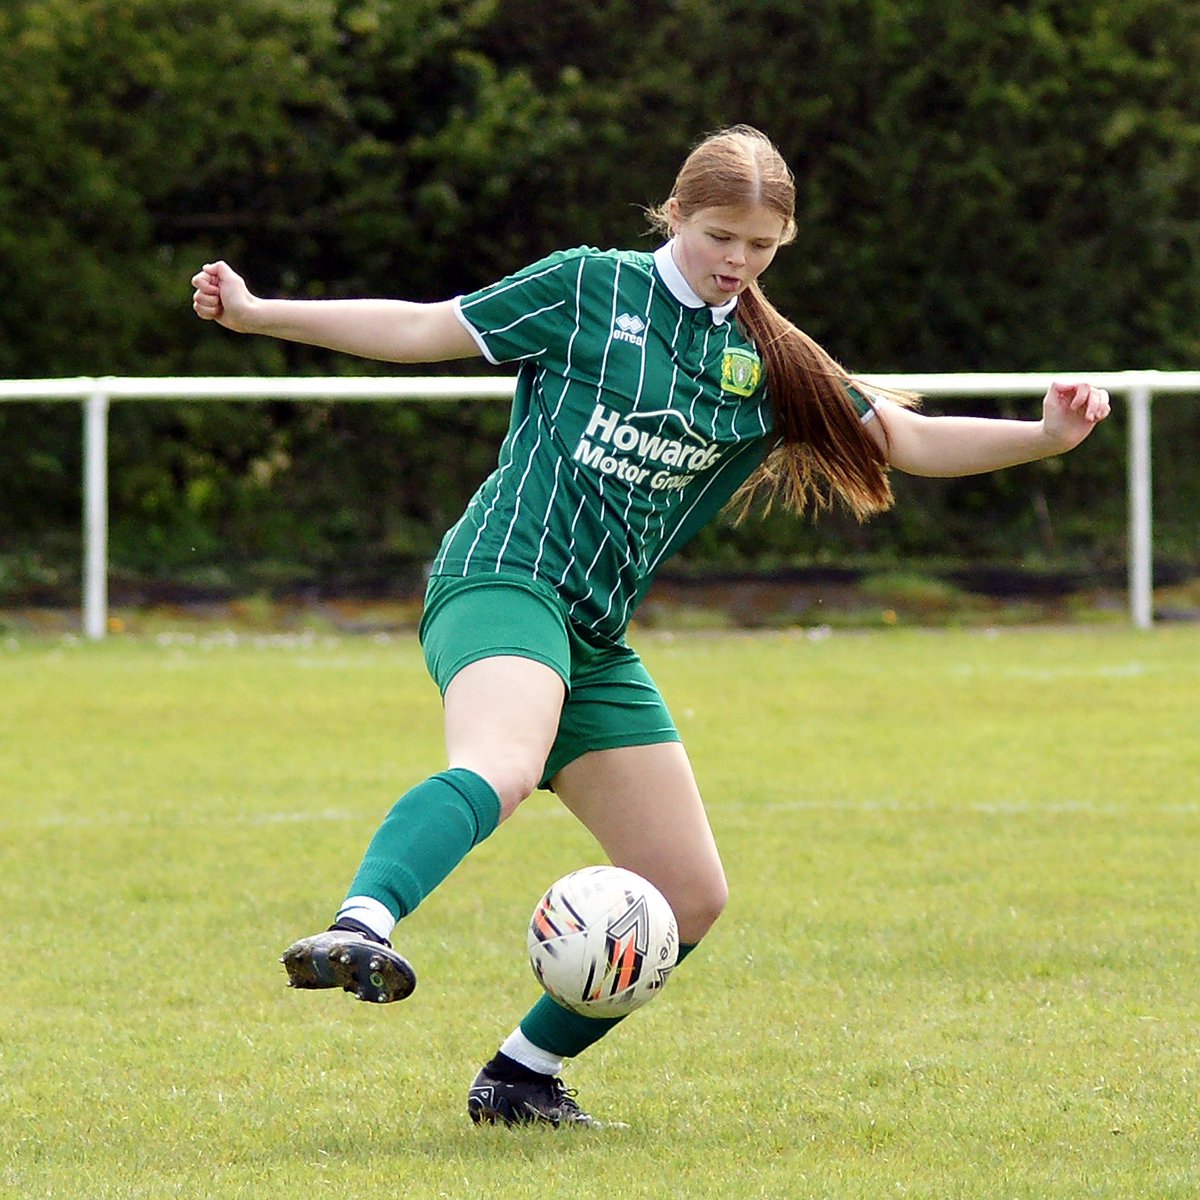 A debut for 16 year old Ava Beattie this afternoon 💚 Beattie came on for the second half and put in a hard shift at right-back!